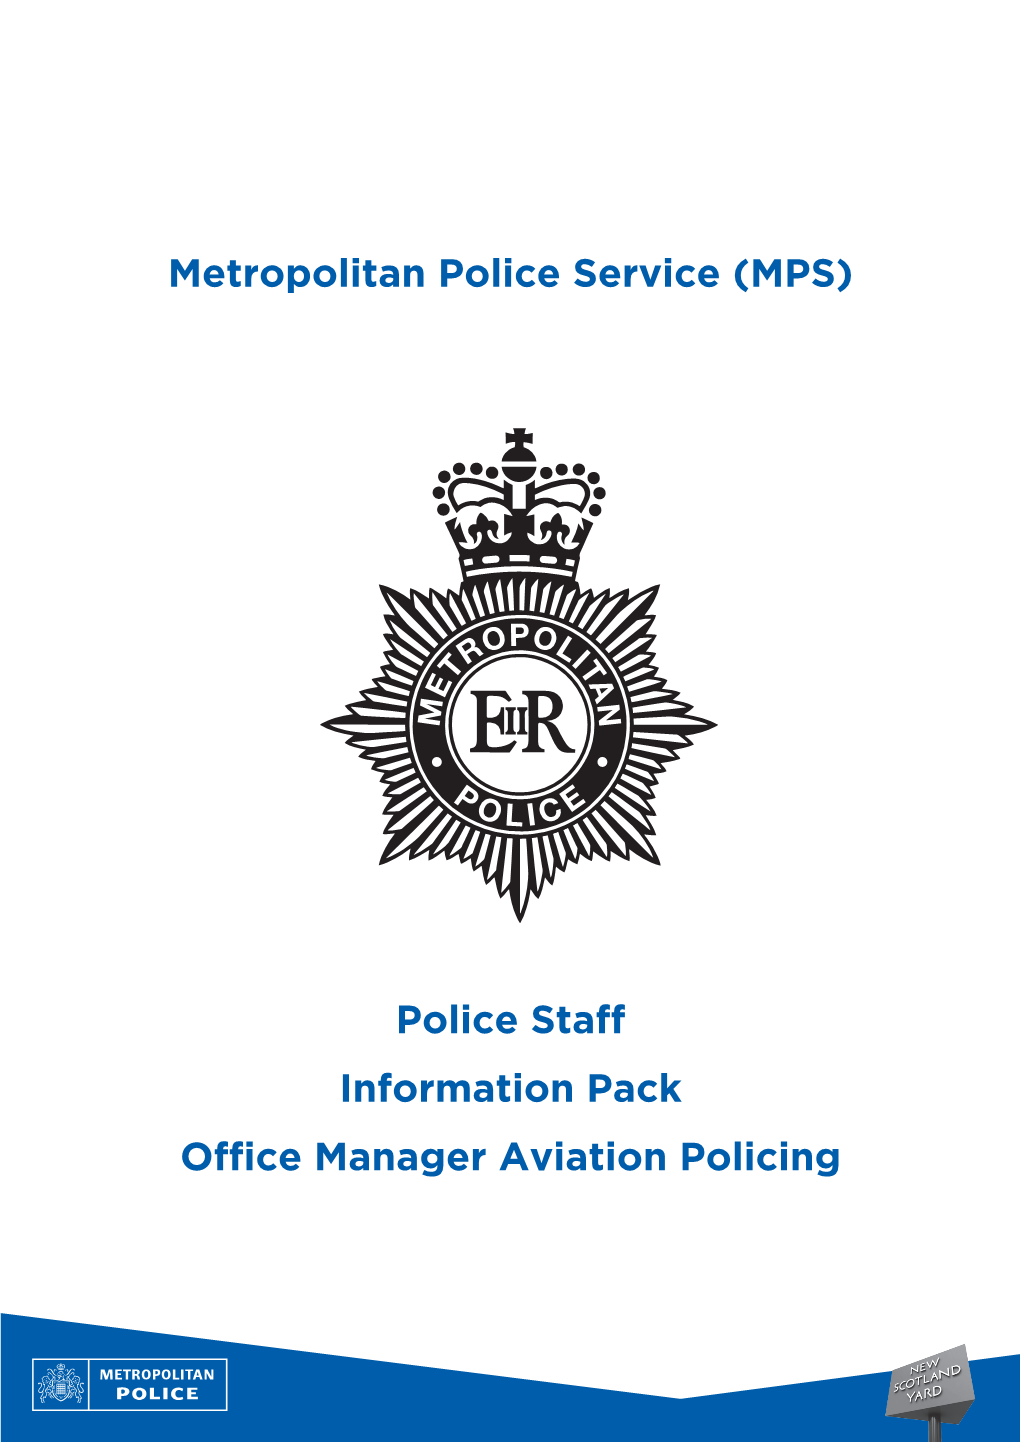 (MPS) Police Staff Information Pack Office Manager Aviation Policing